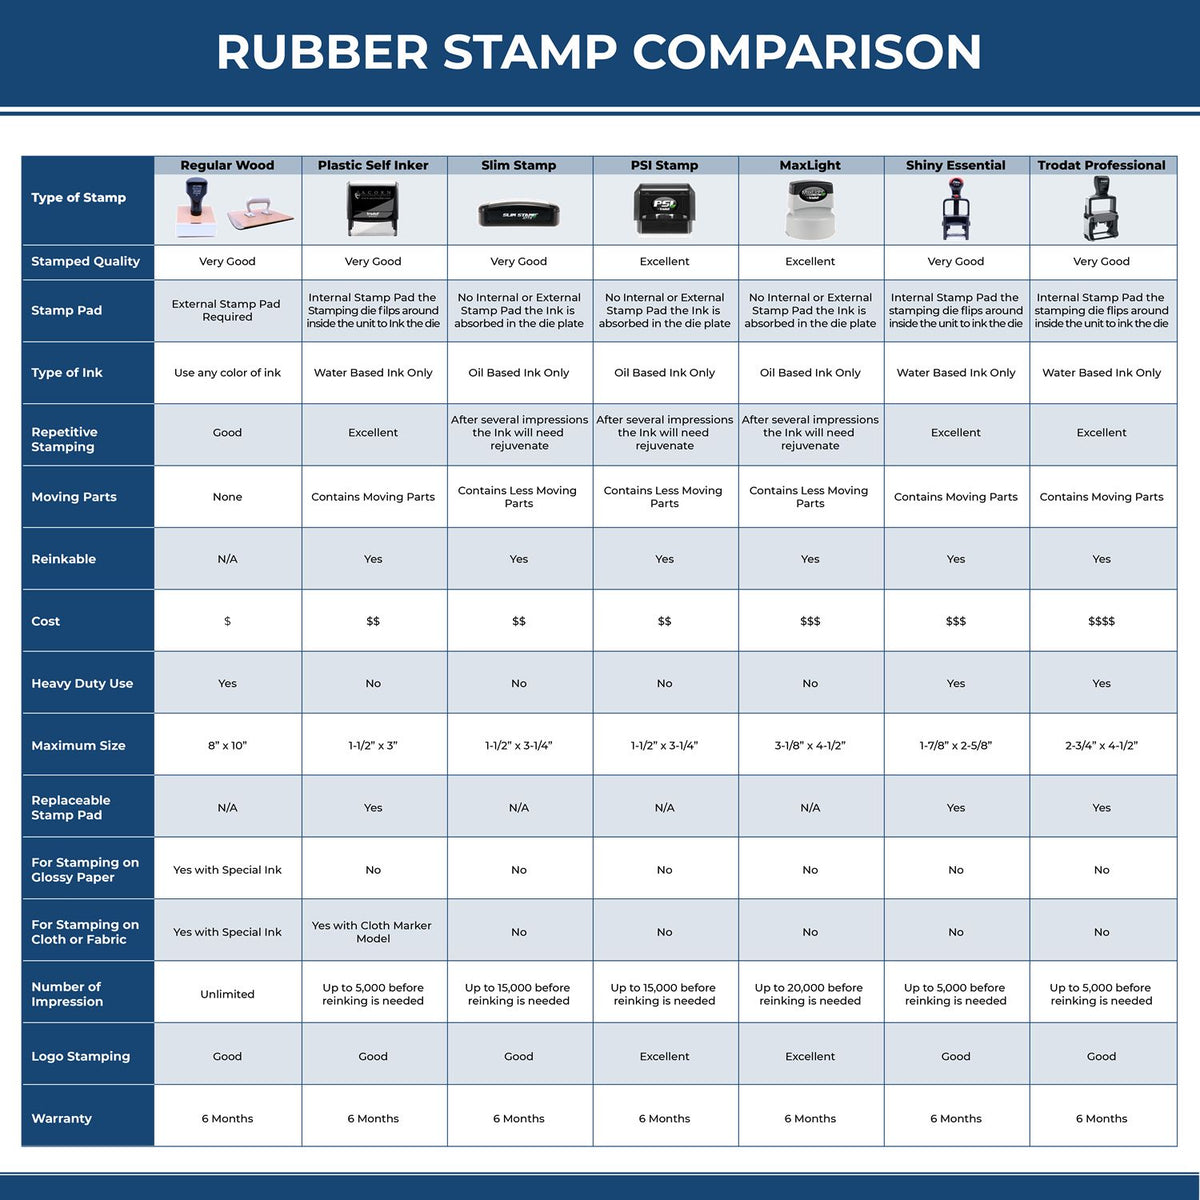 Large Self-Inking Bold Covid-19 Stamp 5513S Rubber Stamp Comparison